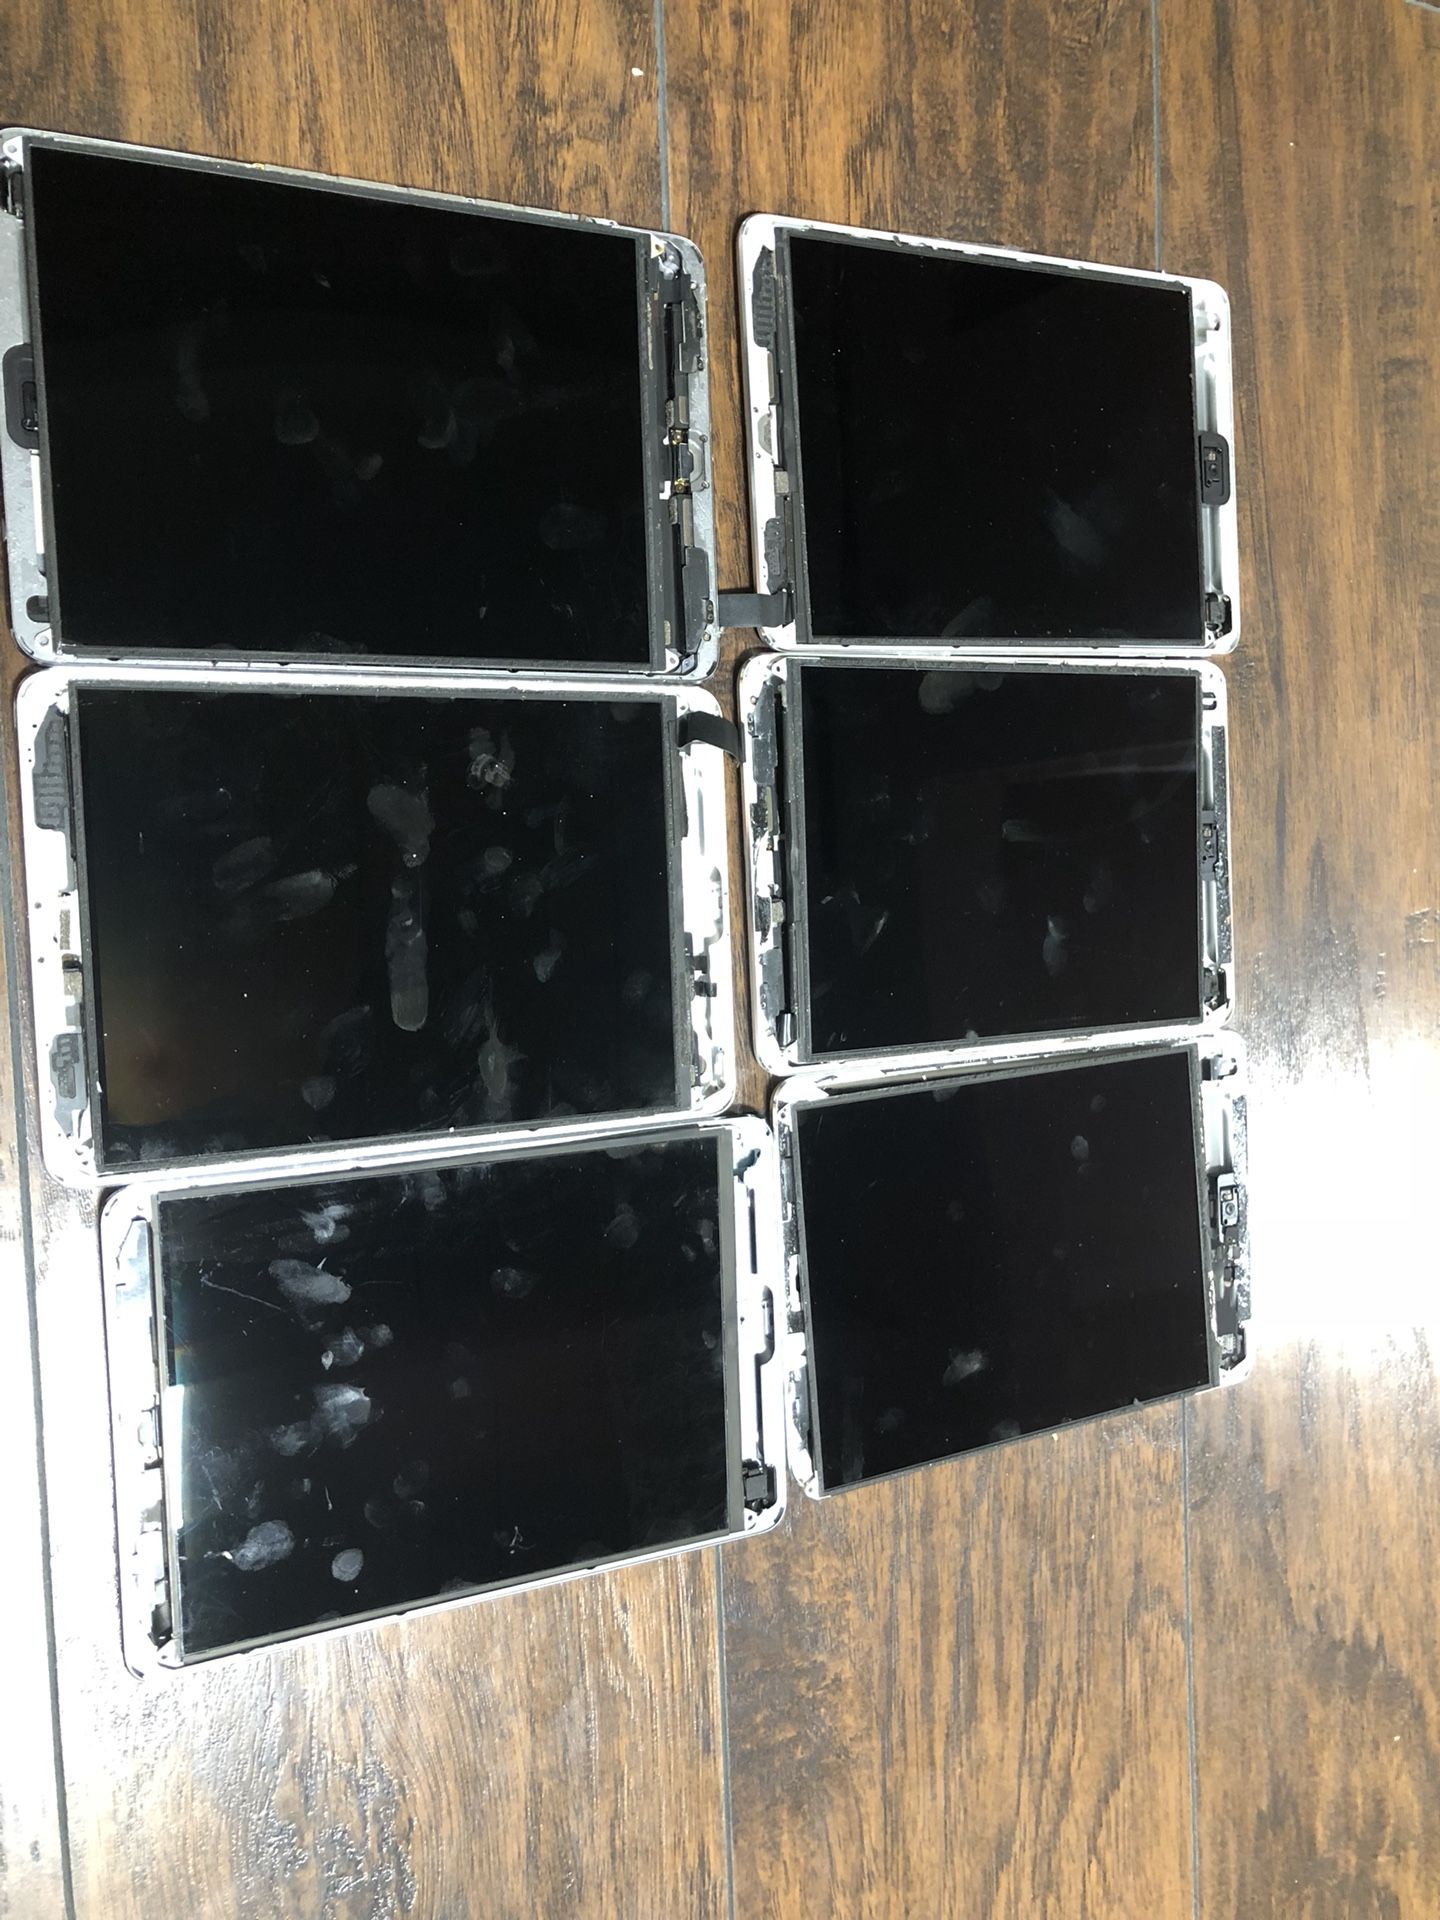 All iPad for part